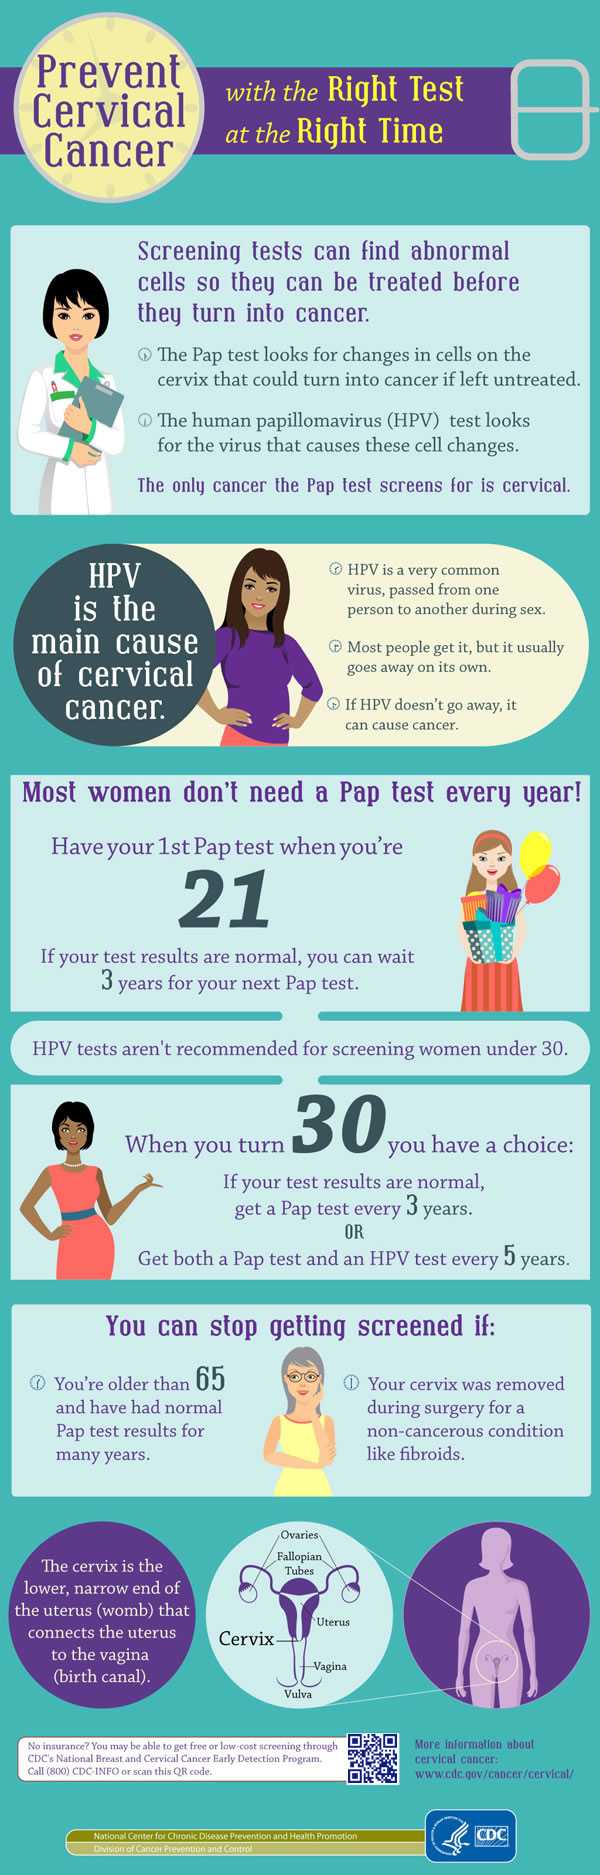 Cdc Infographic Titled Prevent Cervical Cancer With The Right Test At The Right Time